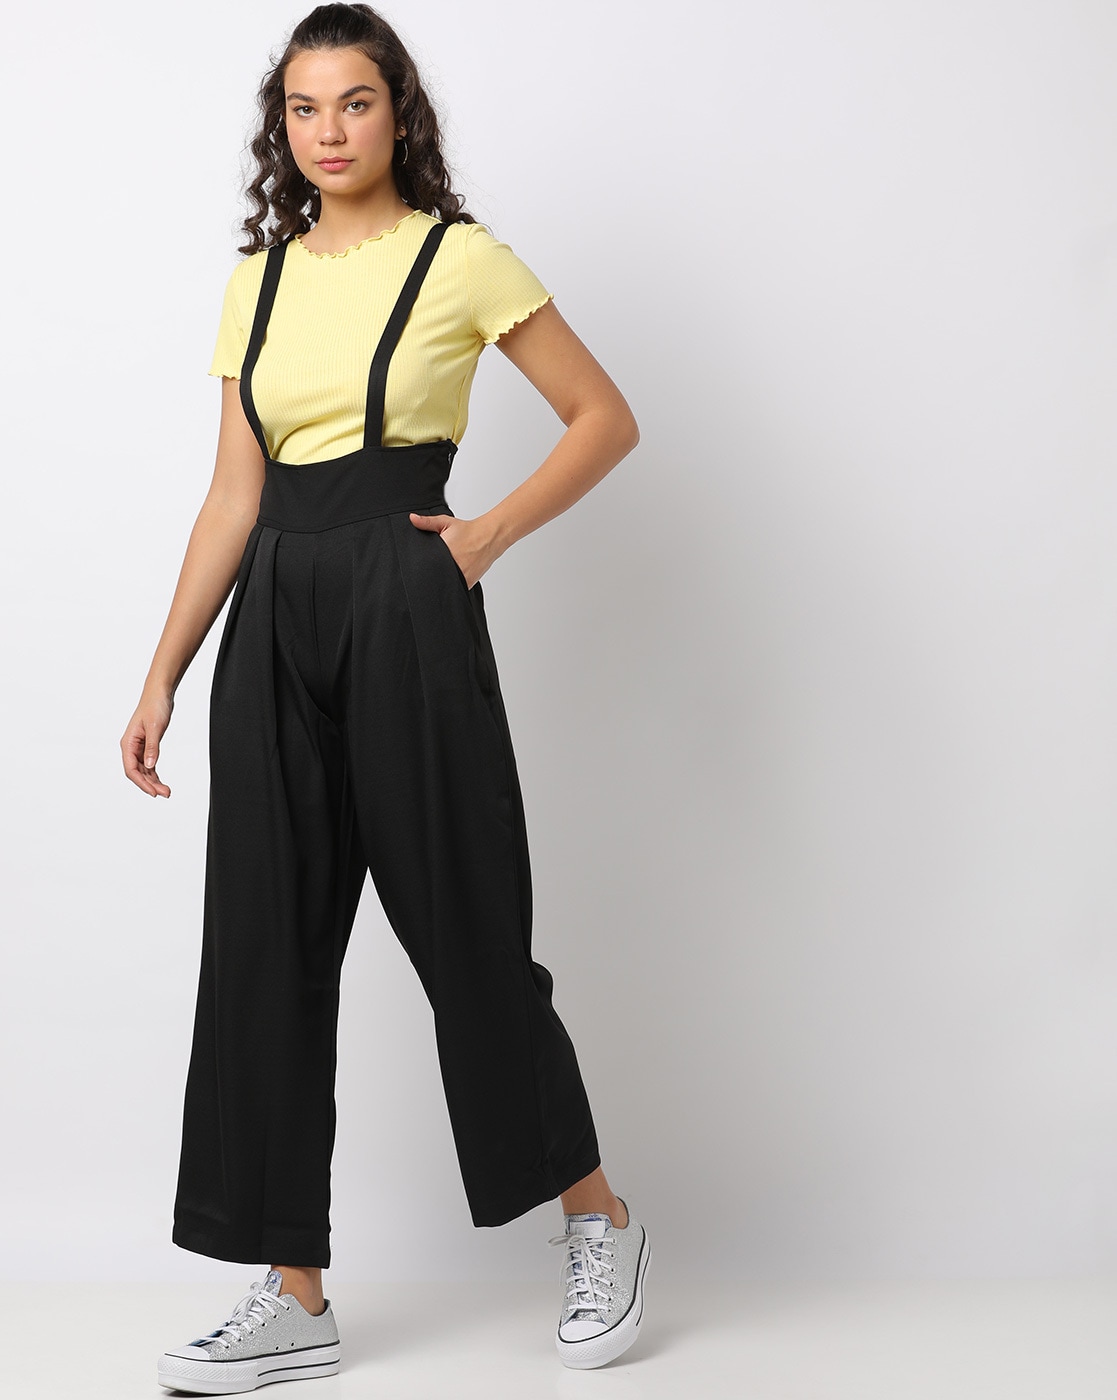 Highrise black pants with suspender straps  Suspenders for women  Clothes Fashion outfits